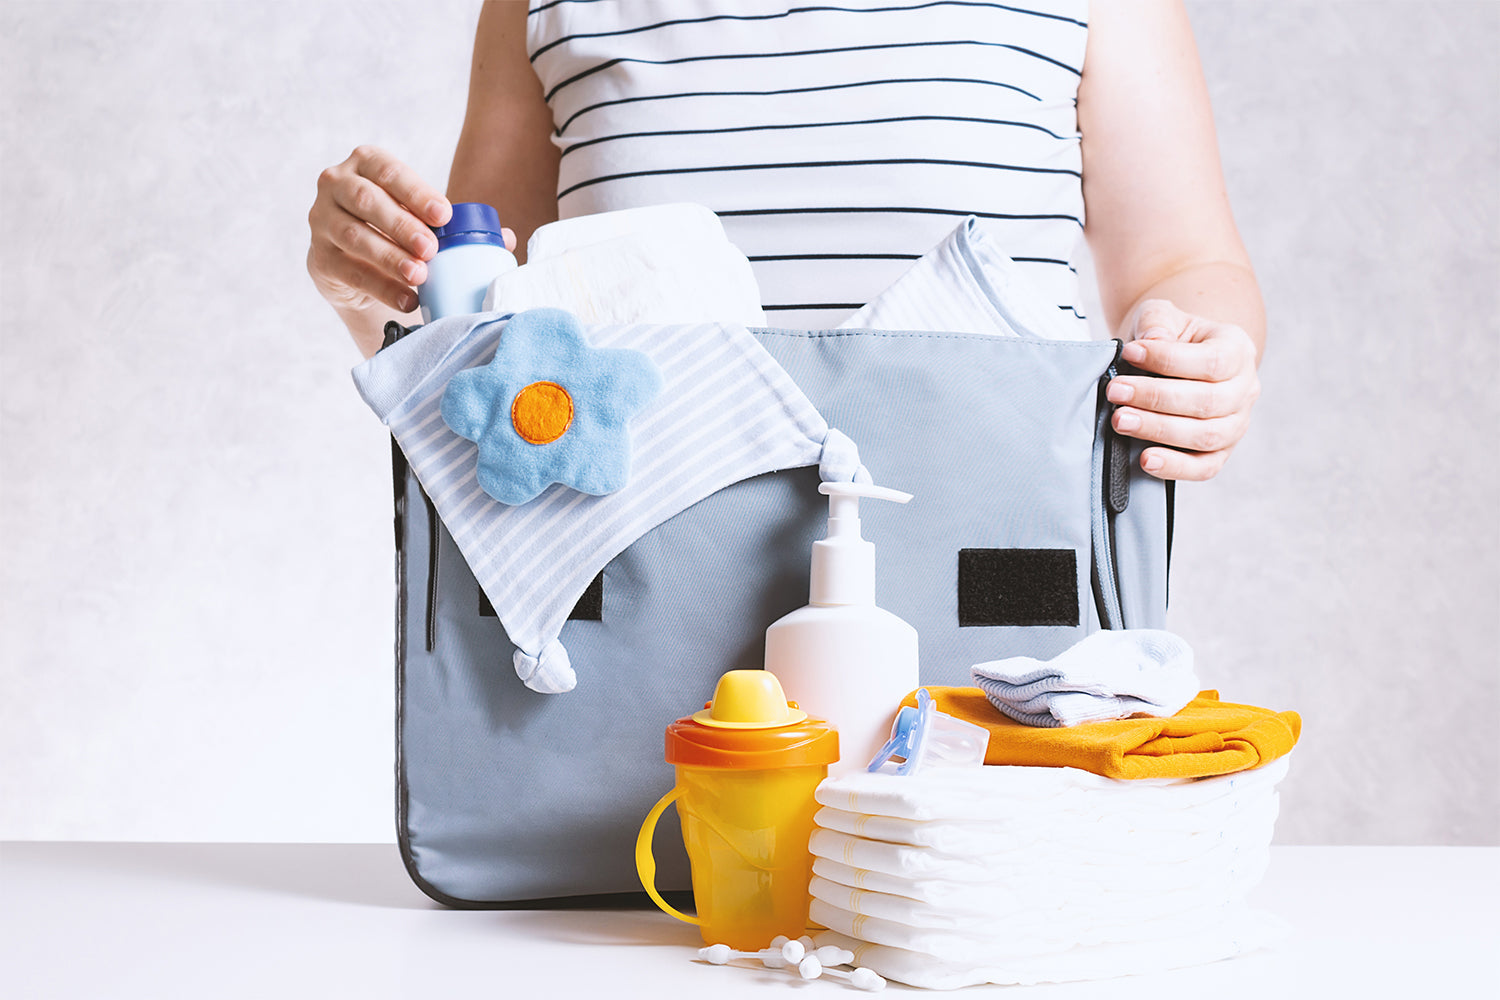 baby basic needs and items